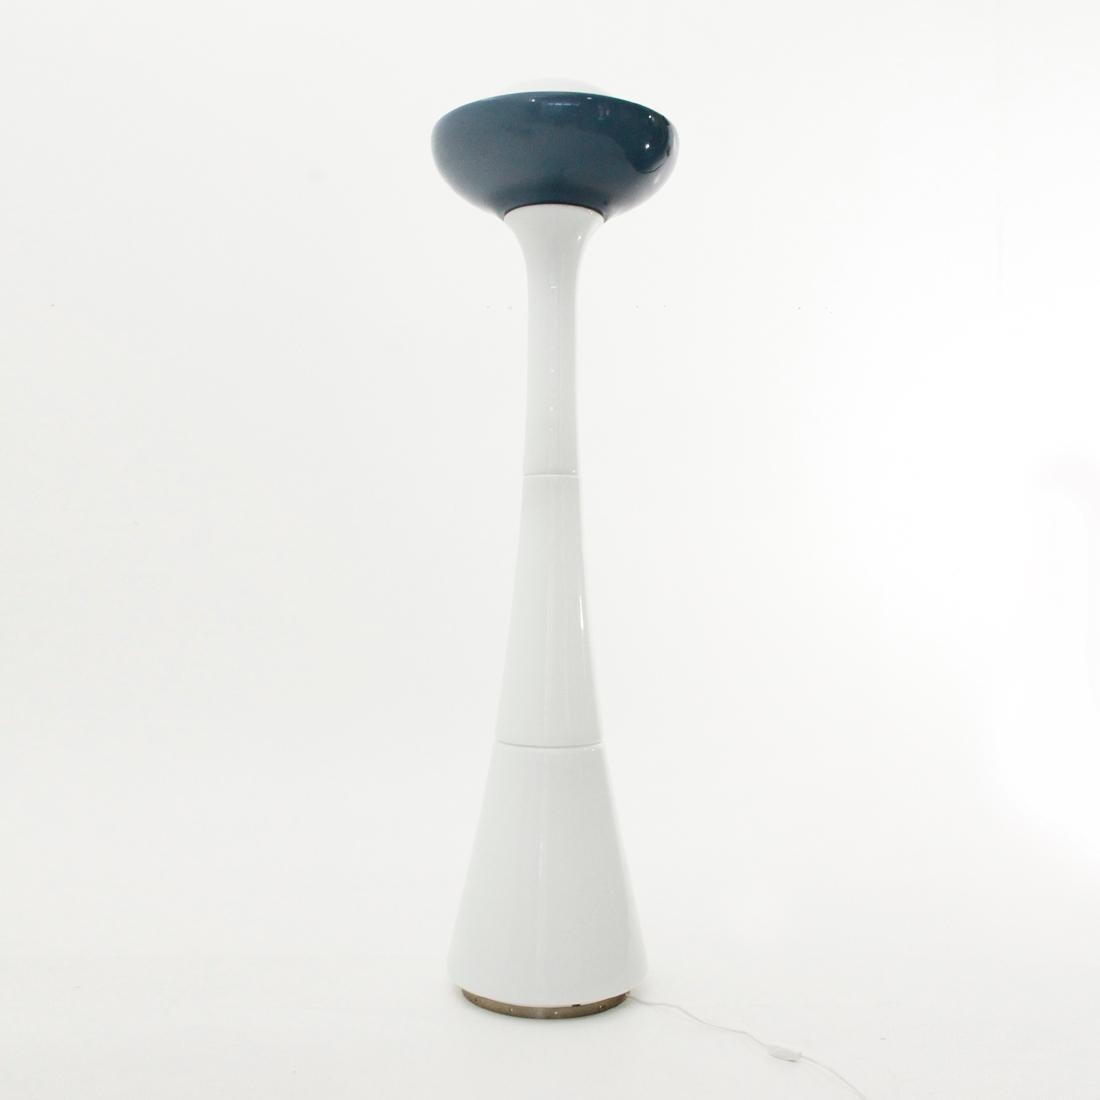 Rare and large floor lamp produced in the 1960s by Selenova based on a design by Carlo Nason.
Base with metal stem on which 4 white and one blue and white glasses are mounted.
Ground power button.
Good general condition, blue spun glass near the